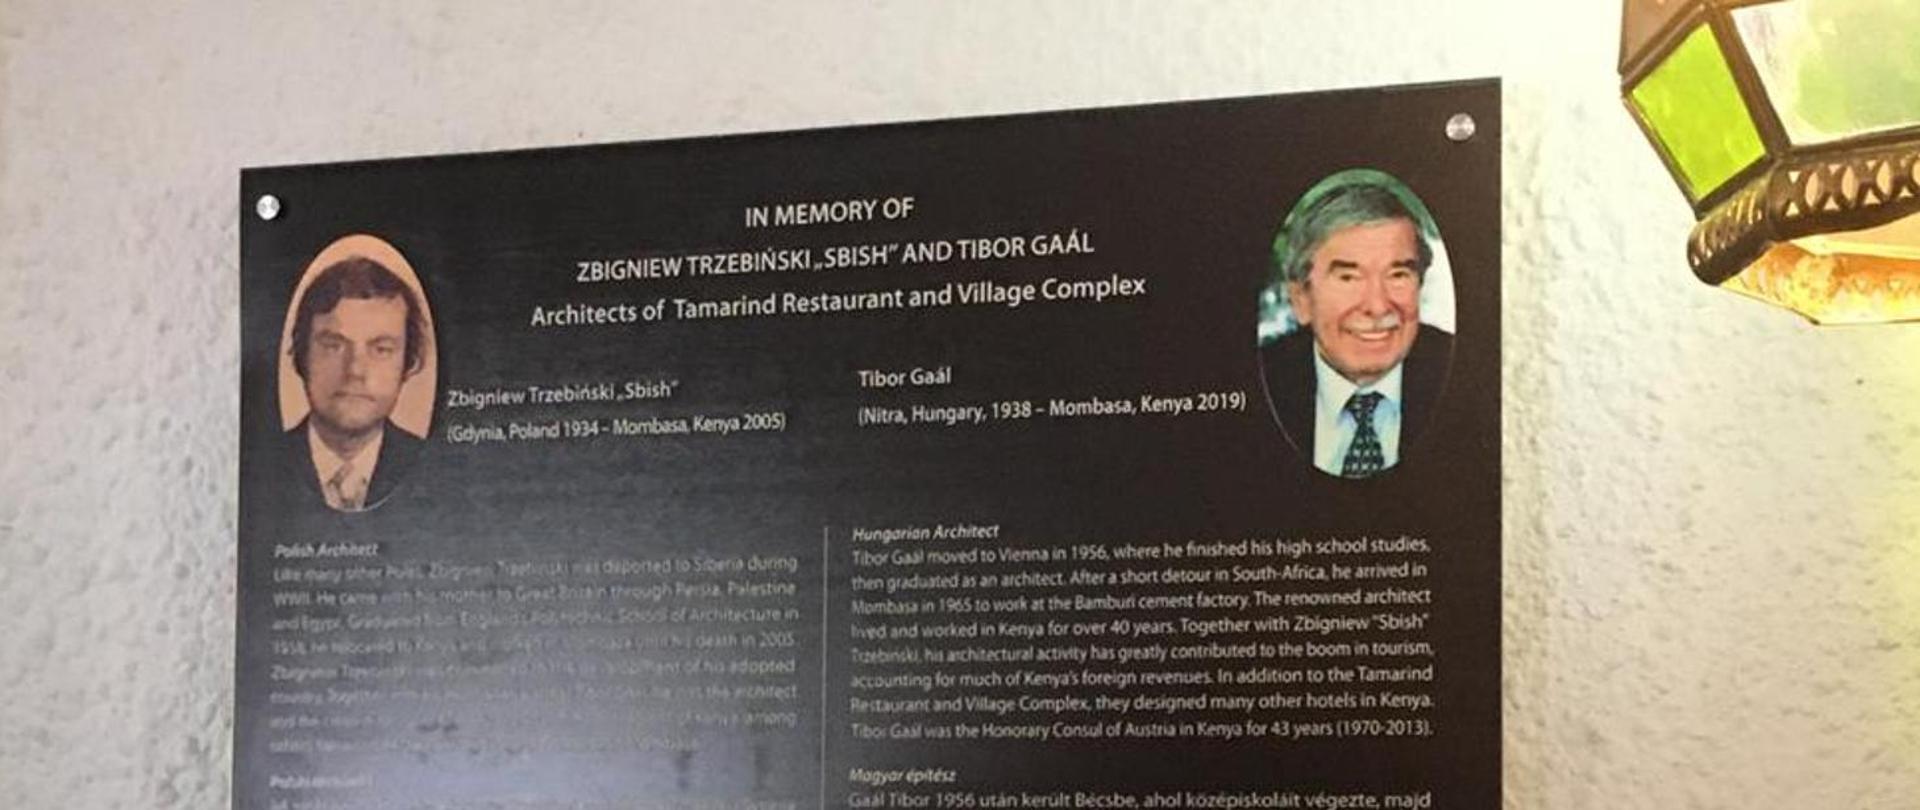 The ceremony of unveiling the plaque commemorating architects Zbigniew Trzebiński and Tibor Gáll in Mombasa